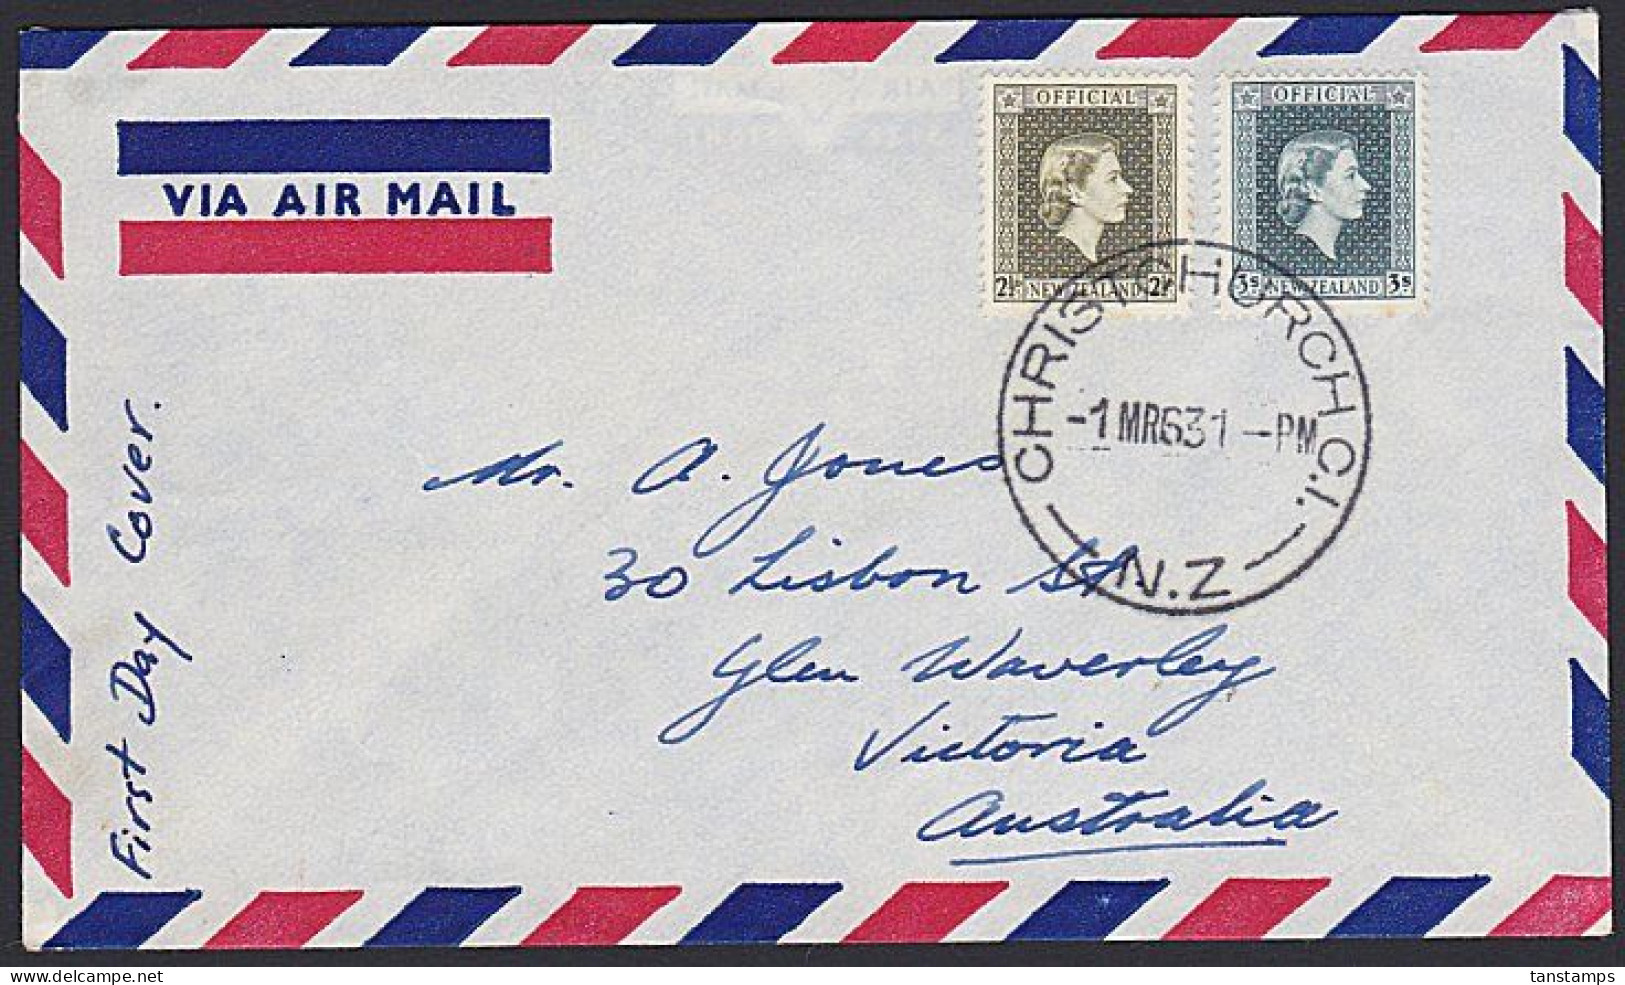 QEII OFFICIAL FDC AIRMAIL TO AUSTRALIA - Luchtpost